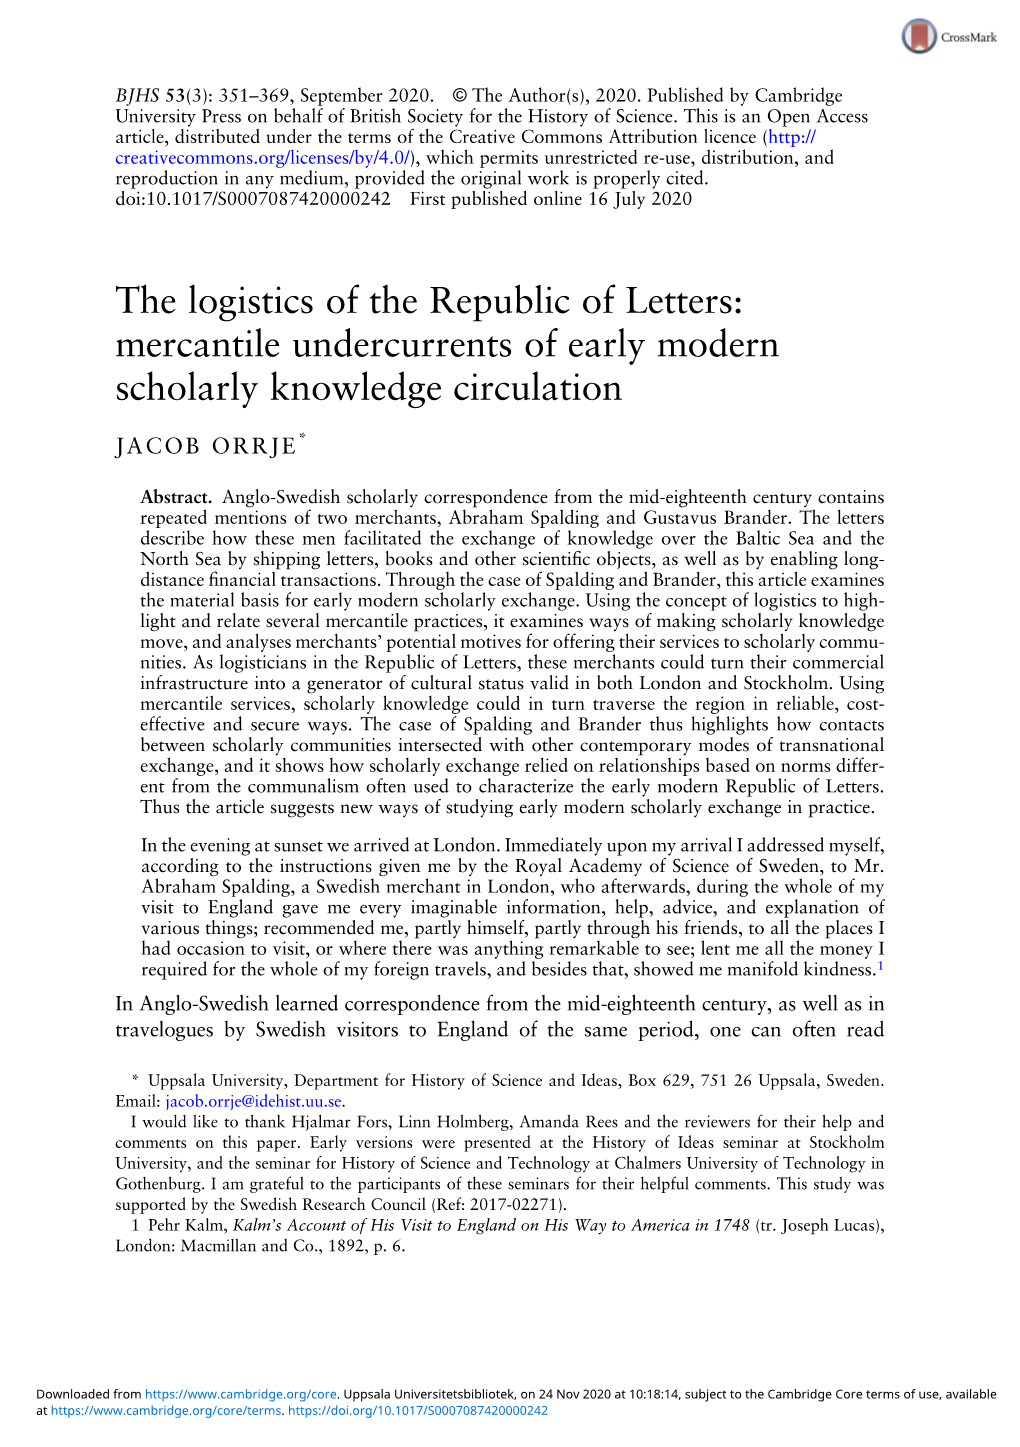 The Logistics of the Republic of Letters: Mercantile Undercurrents of Early Modern Scholarly Knowledge Circulation